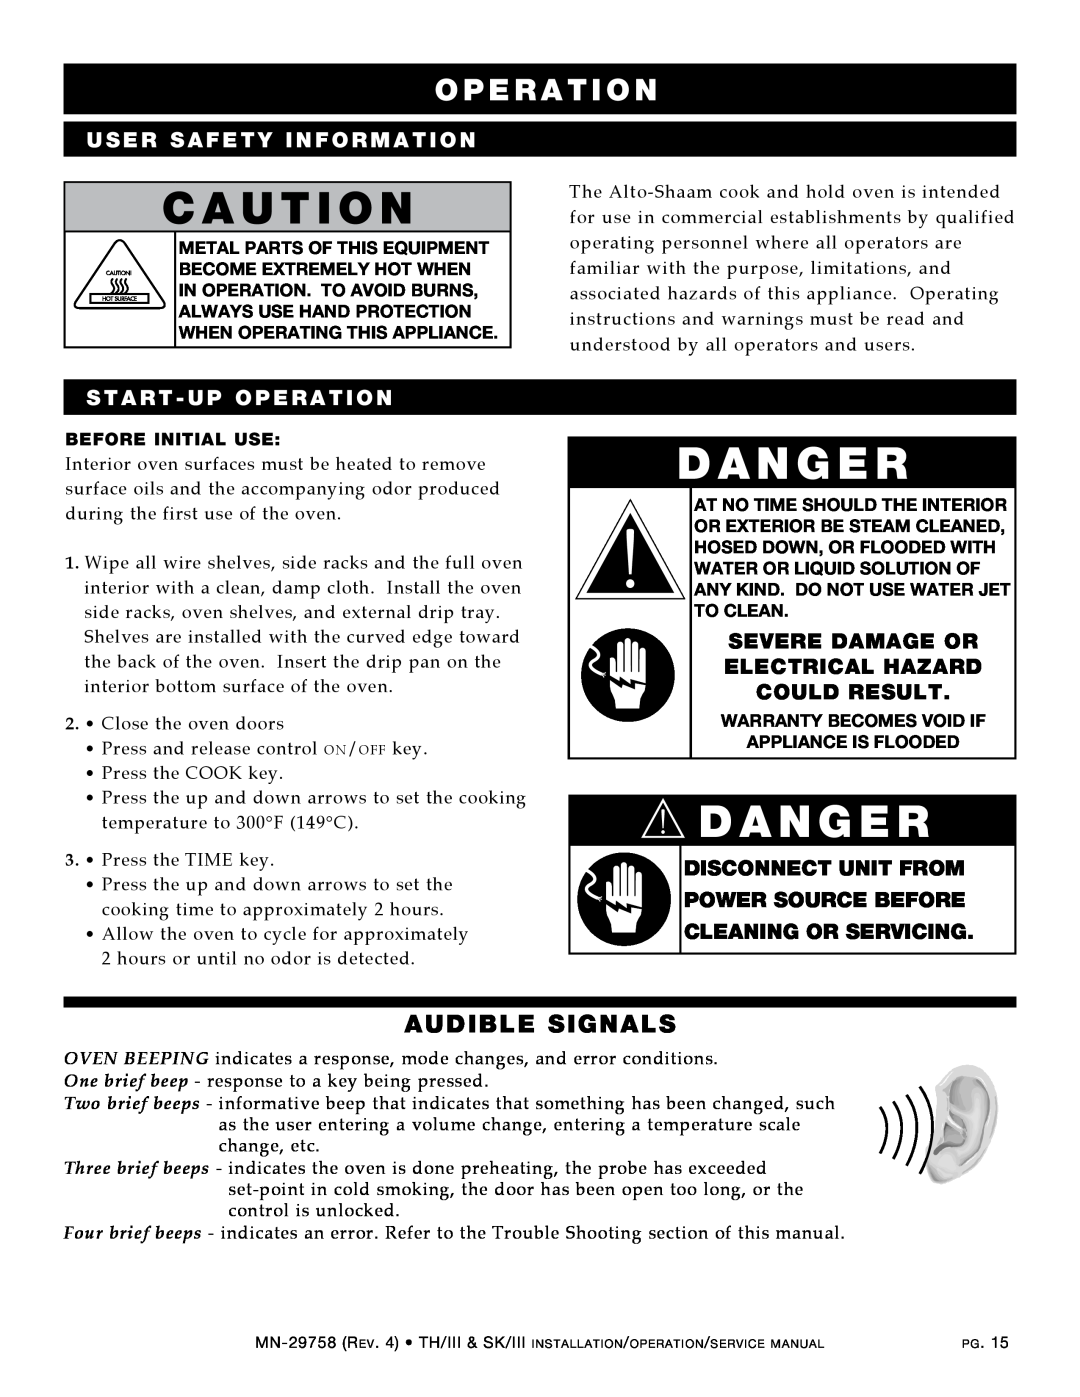 Alto-Shaam 1000-SK/III manual c A U T I O N, d A N g E R, dANgER, ope r a t i o n, audible signals, User Safety Information 